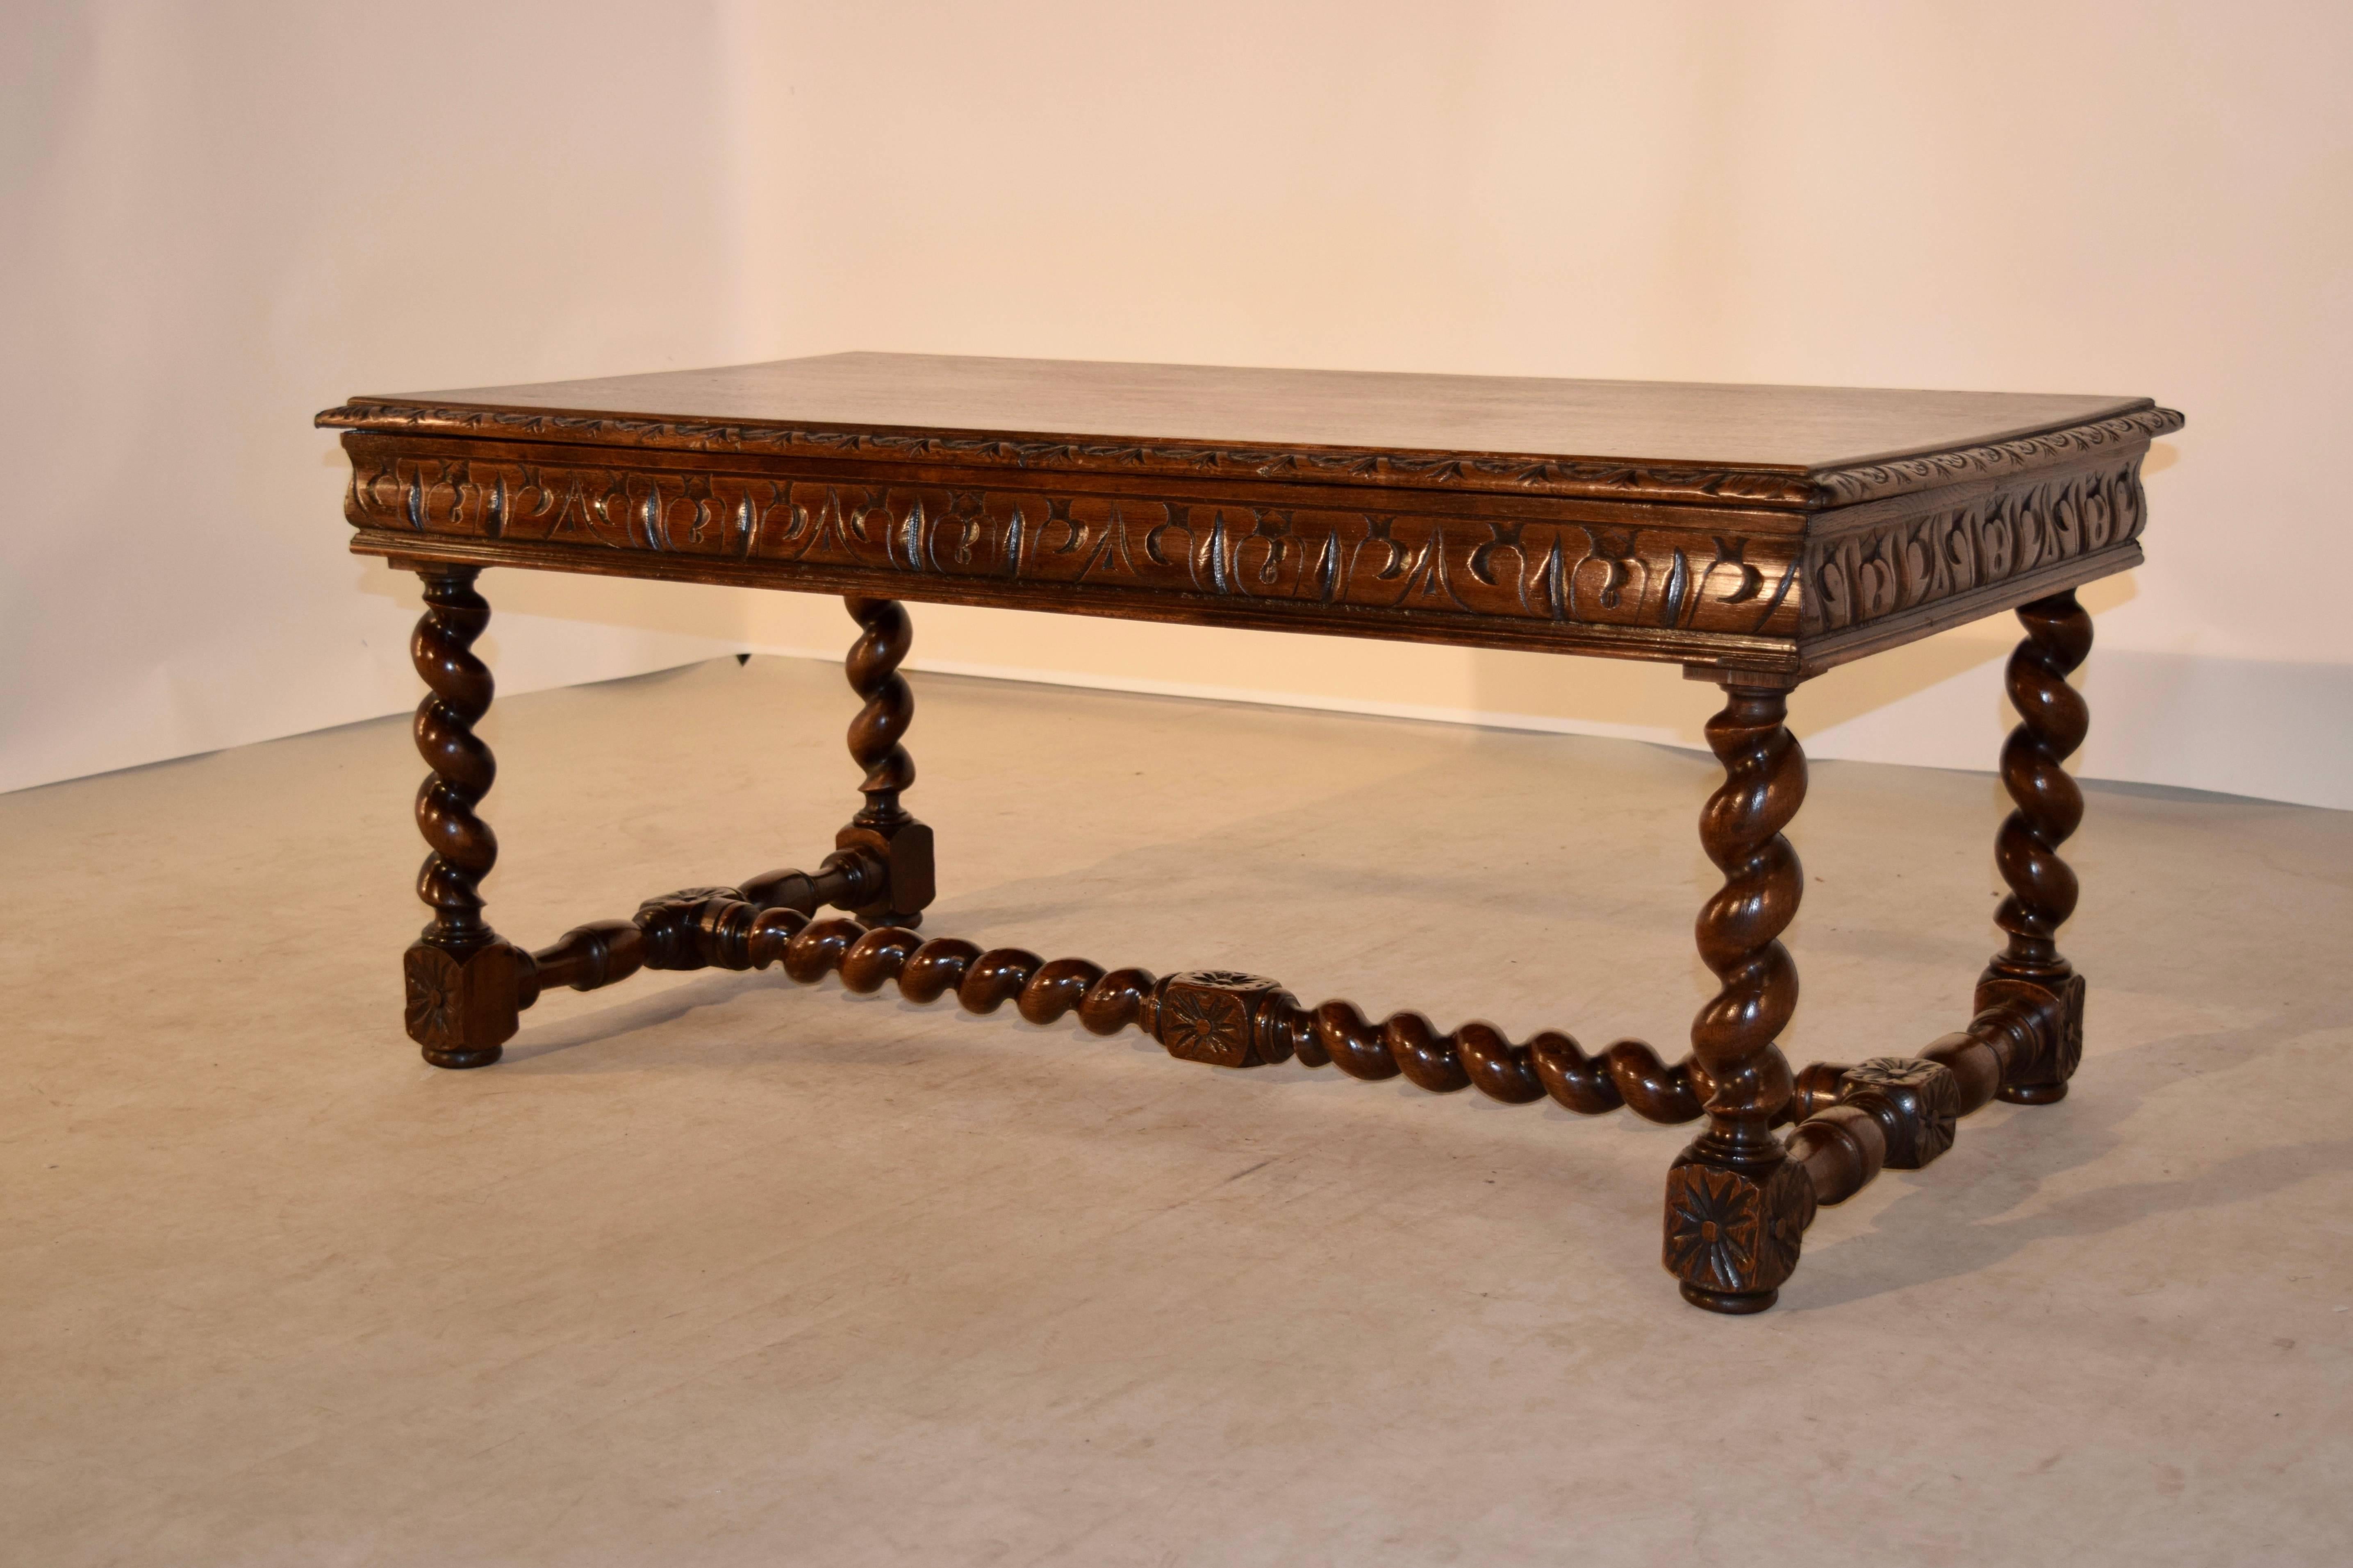 19th century oak coffee table from France. The top has a beveled and gadrooned edge around the top, following down to a hand-carved apron, which conceals a large single drawer in the front. The piece is raised on hand-turned barley twist legs, which